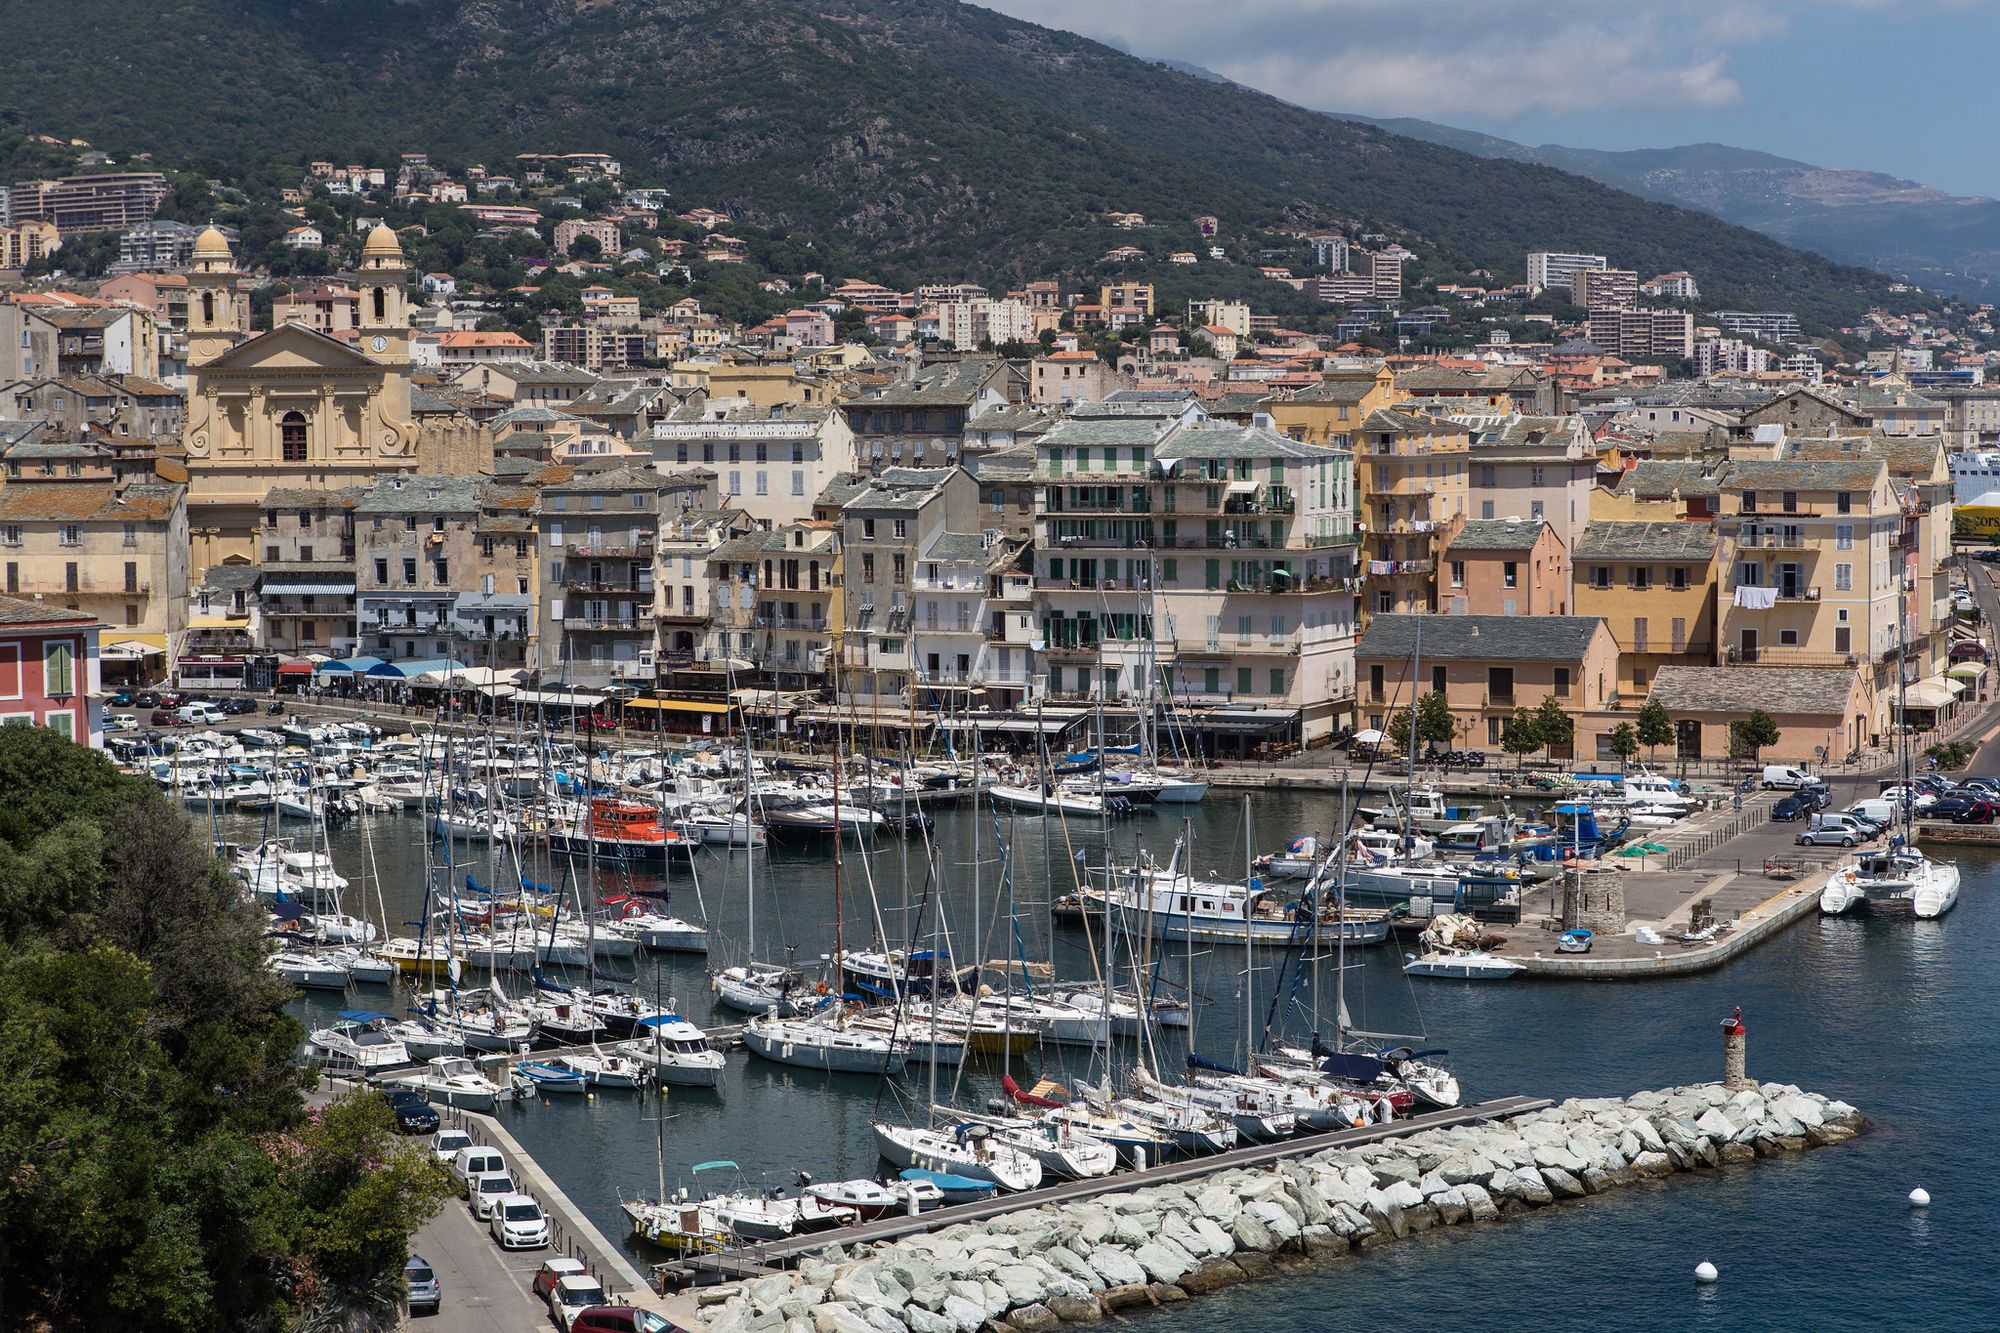 The harbour in Bastia, Corsica. Boats are moored and buildings and hills visible behind them.